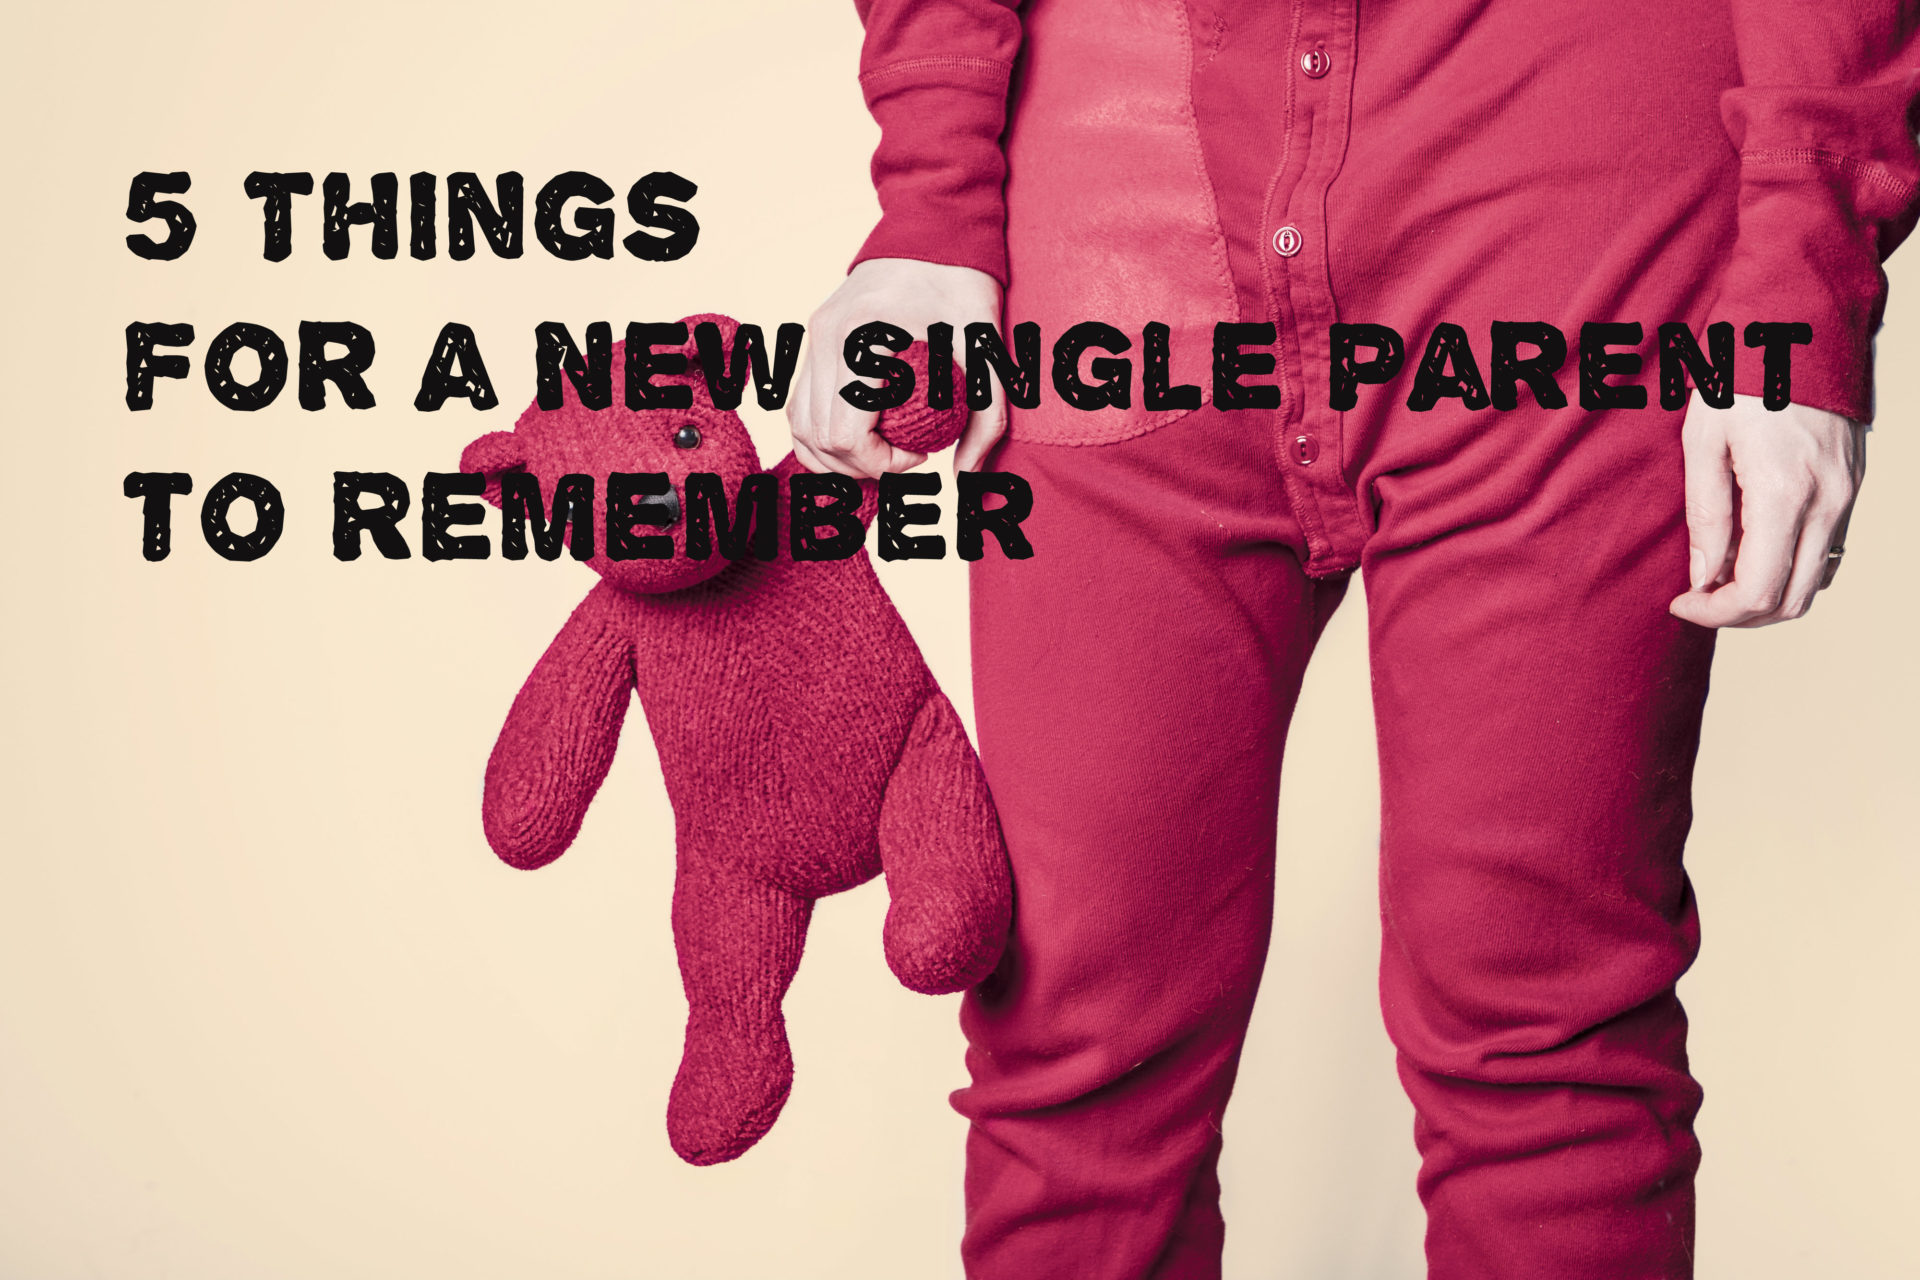 5 Things for a New Single Parent to Remember